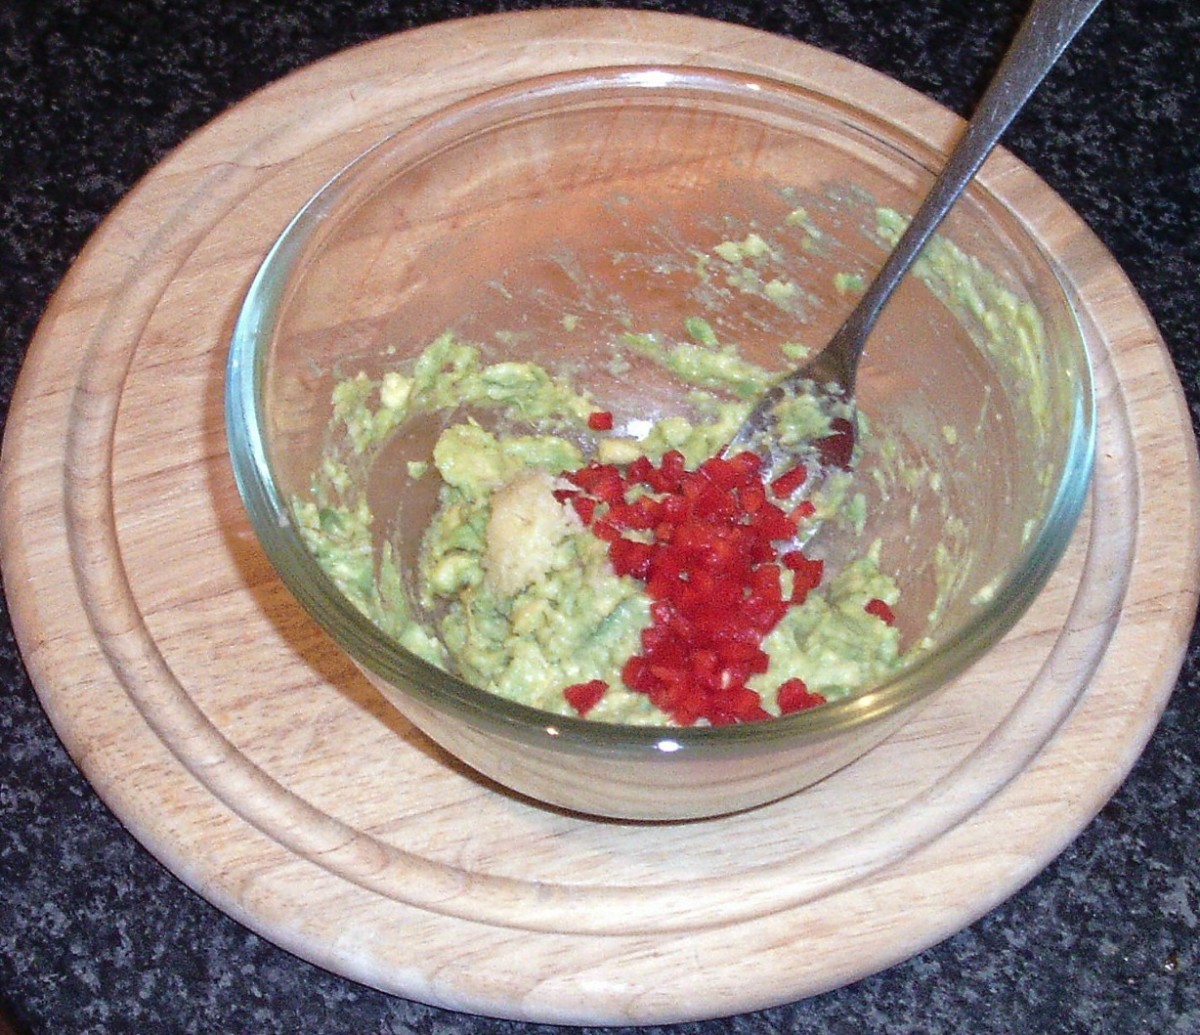 Guacamole ingredients are combined in a bowl